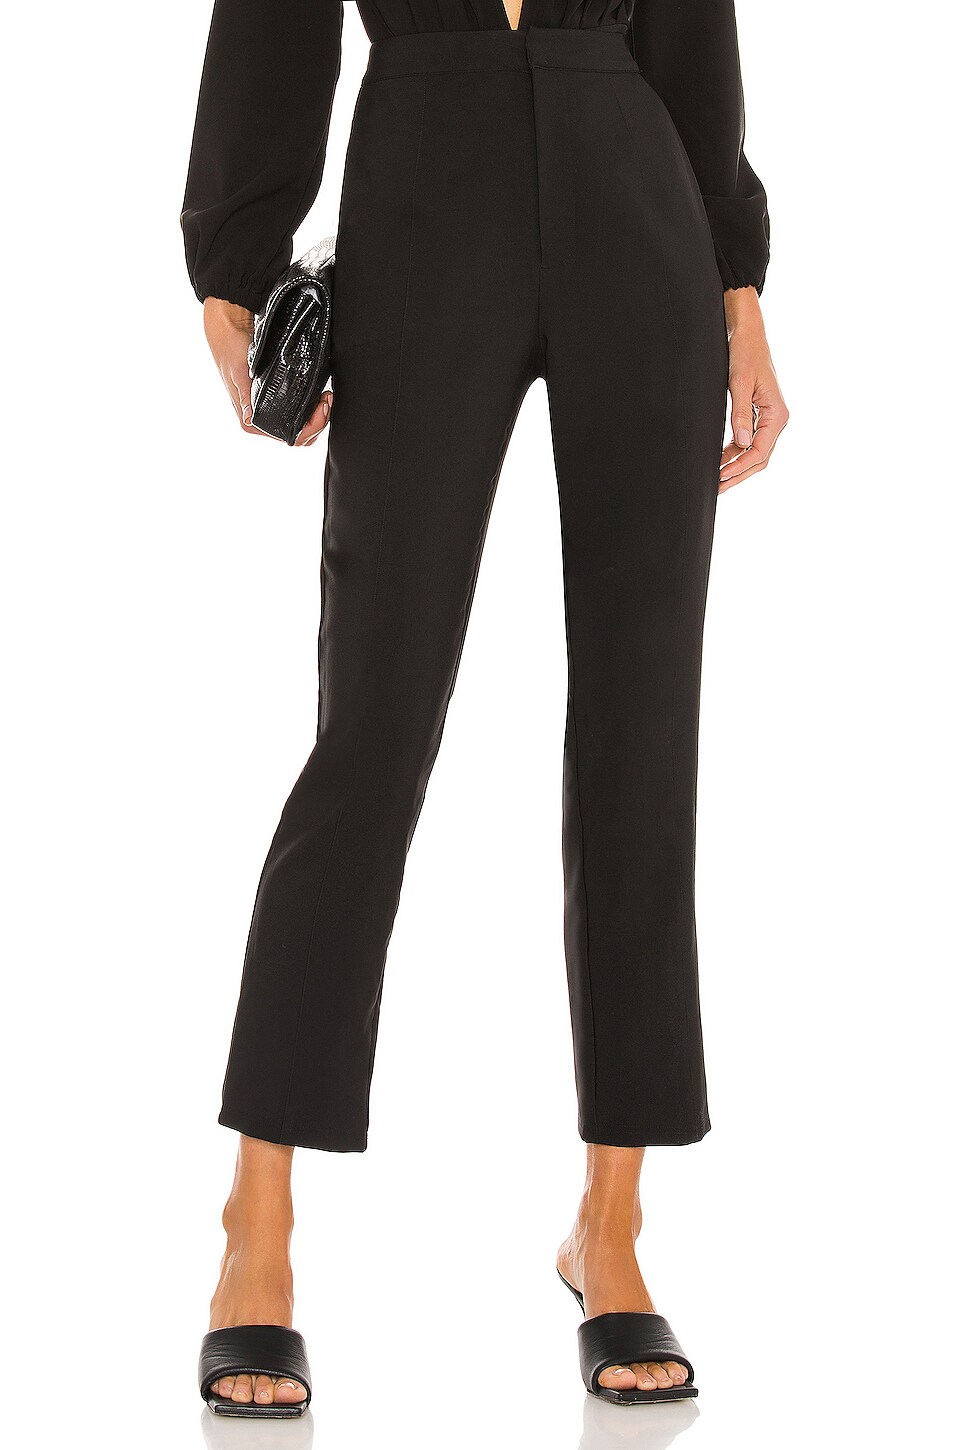 Lovers and Friends Lago Cropped Pant in Black | REVOLVE